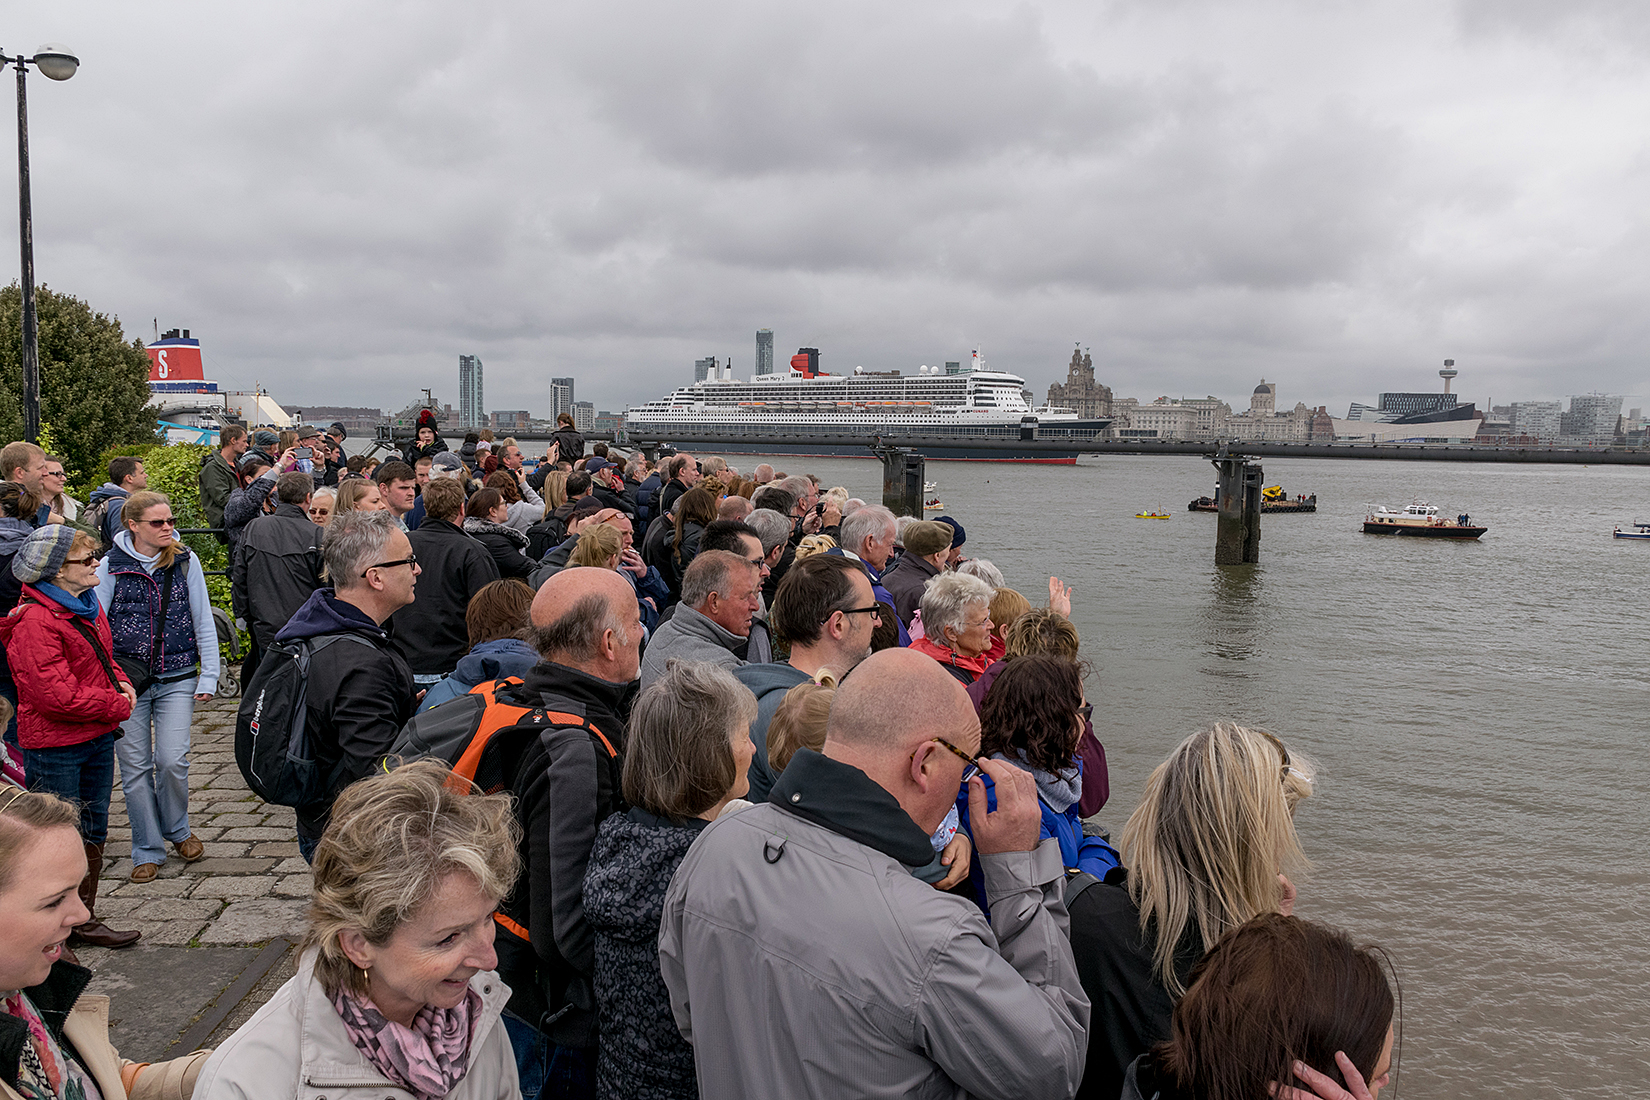 Hundreds of thousands of spectators lined the Mersey to watch the Three Queens make maritime history